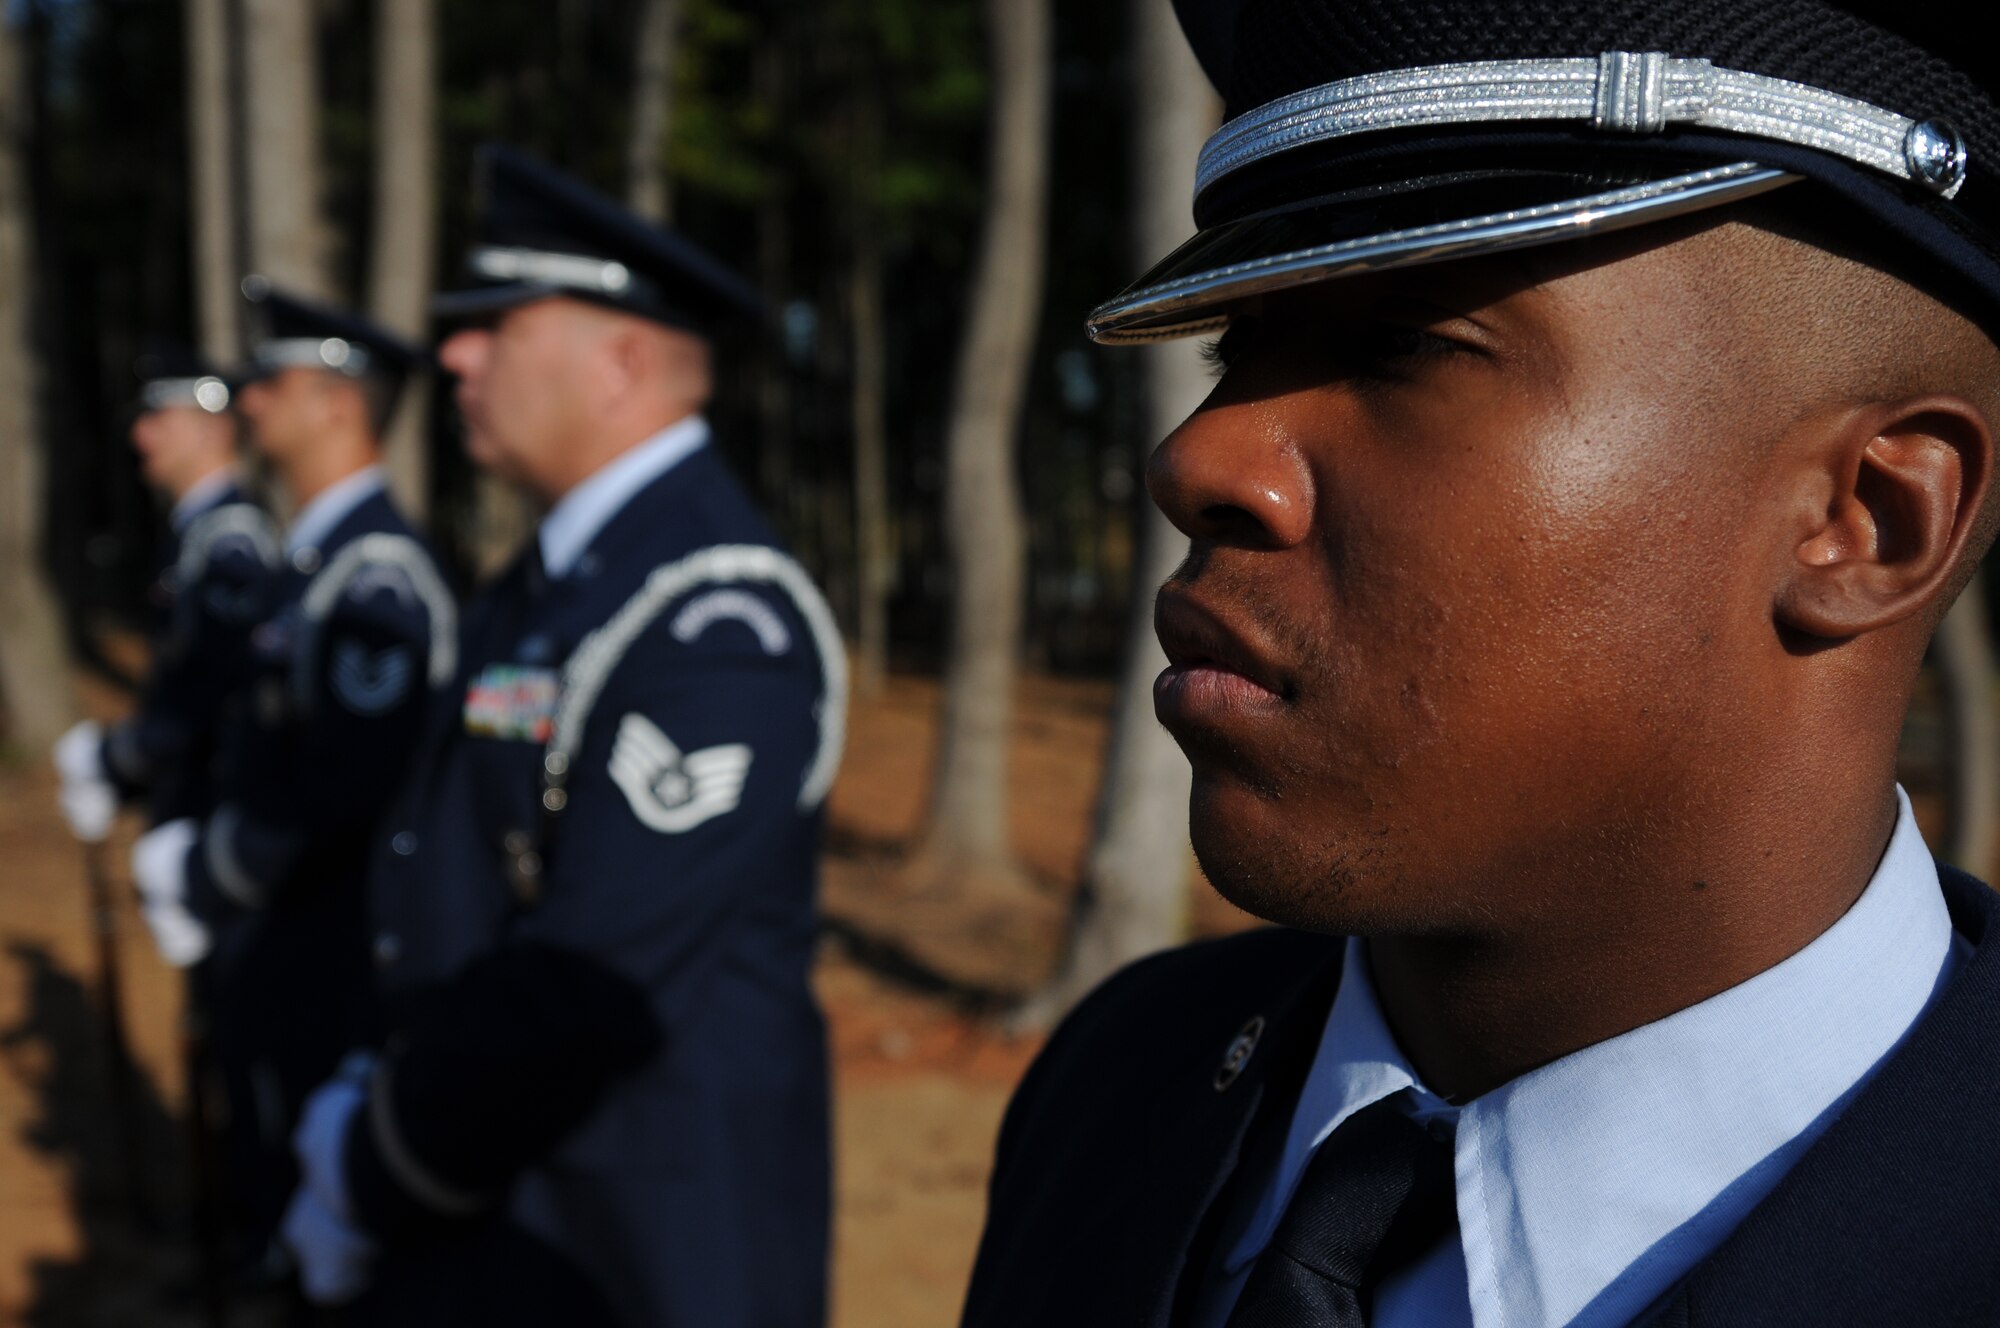 Charlotte, N.C. -- Airmen of the 145th Airlift Wing Honor Guard stand-by at the memorial service honoring North Carolina Air National Guardsmen deceased within the last year. (NCANG photo by Tech. Sgt. Brian E. Christiansen)